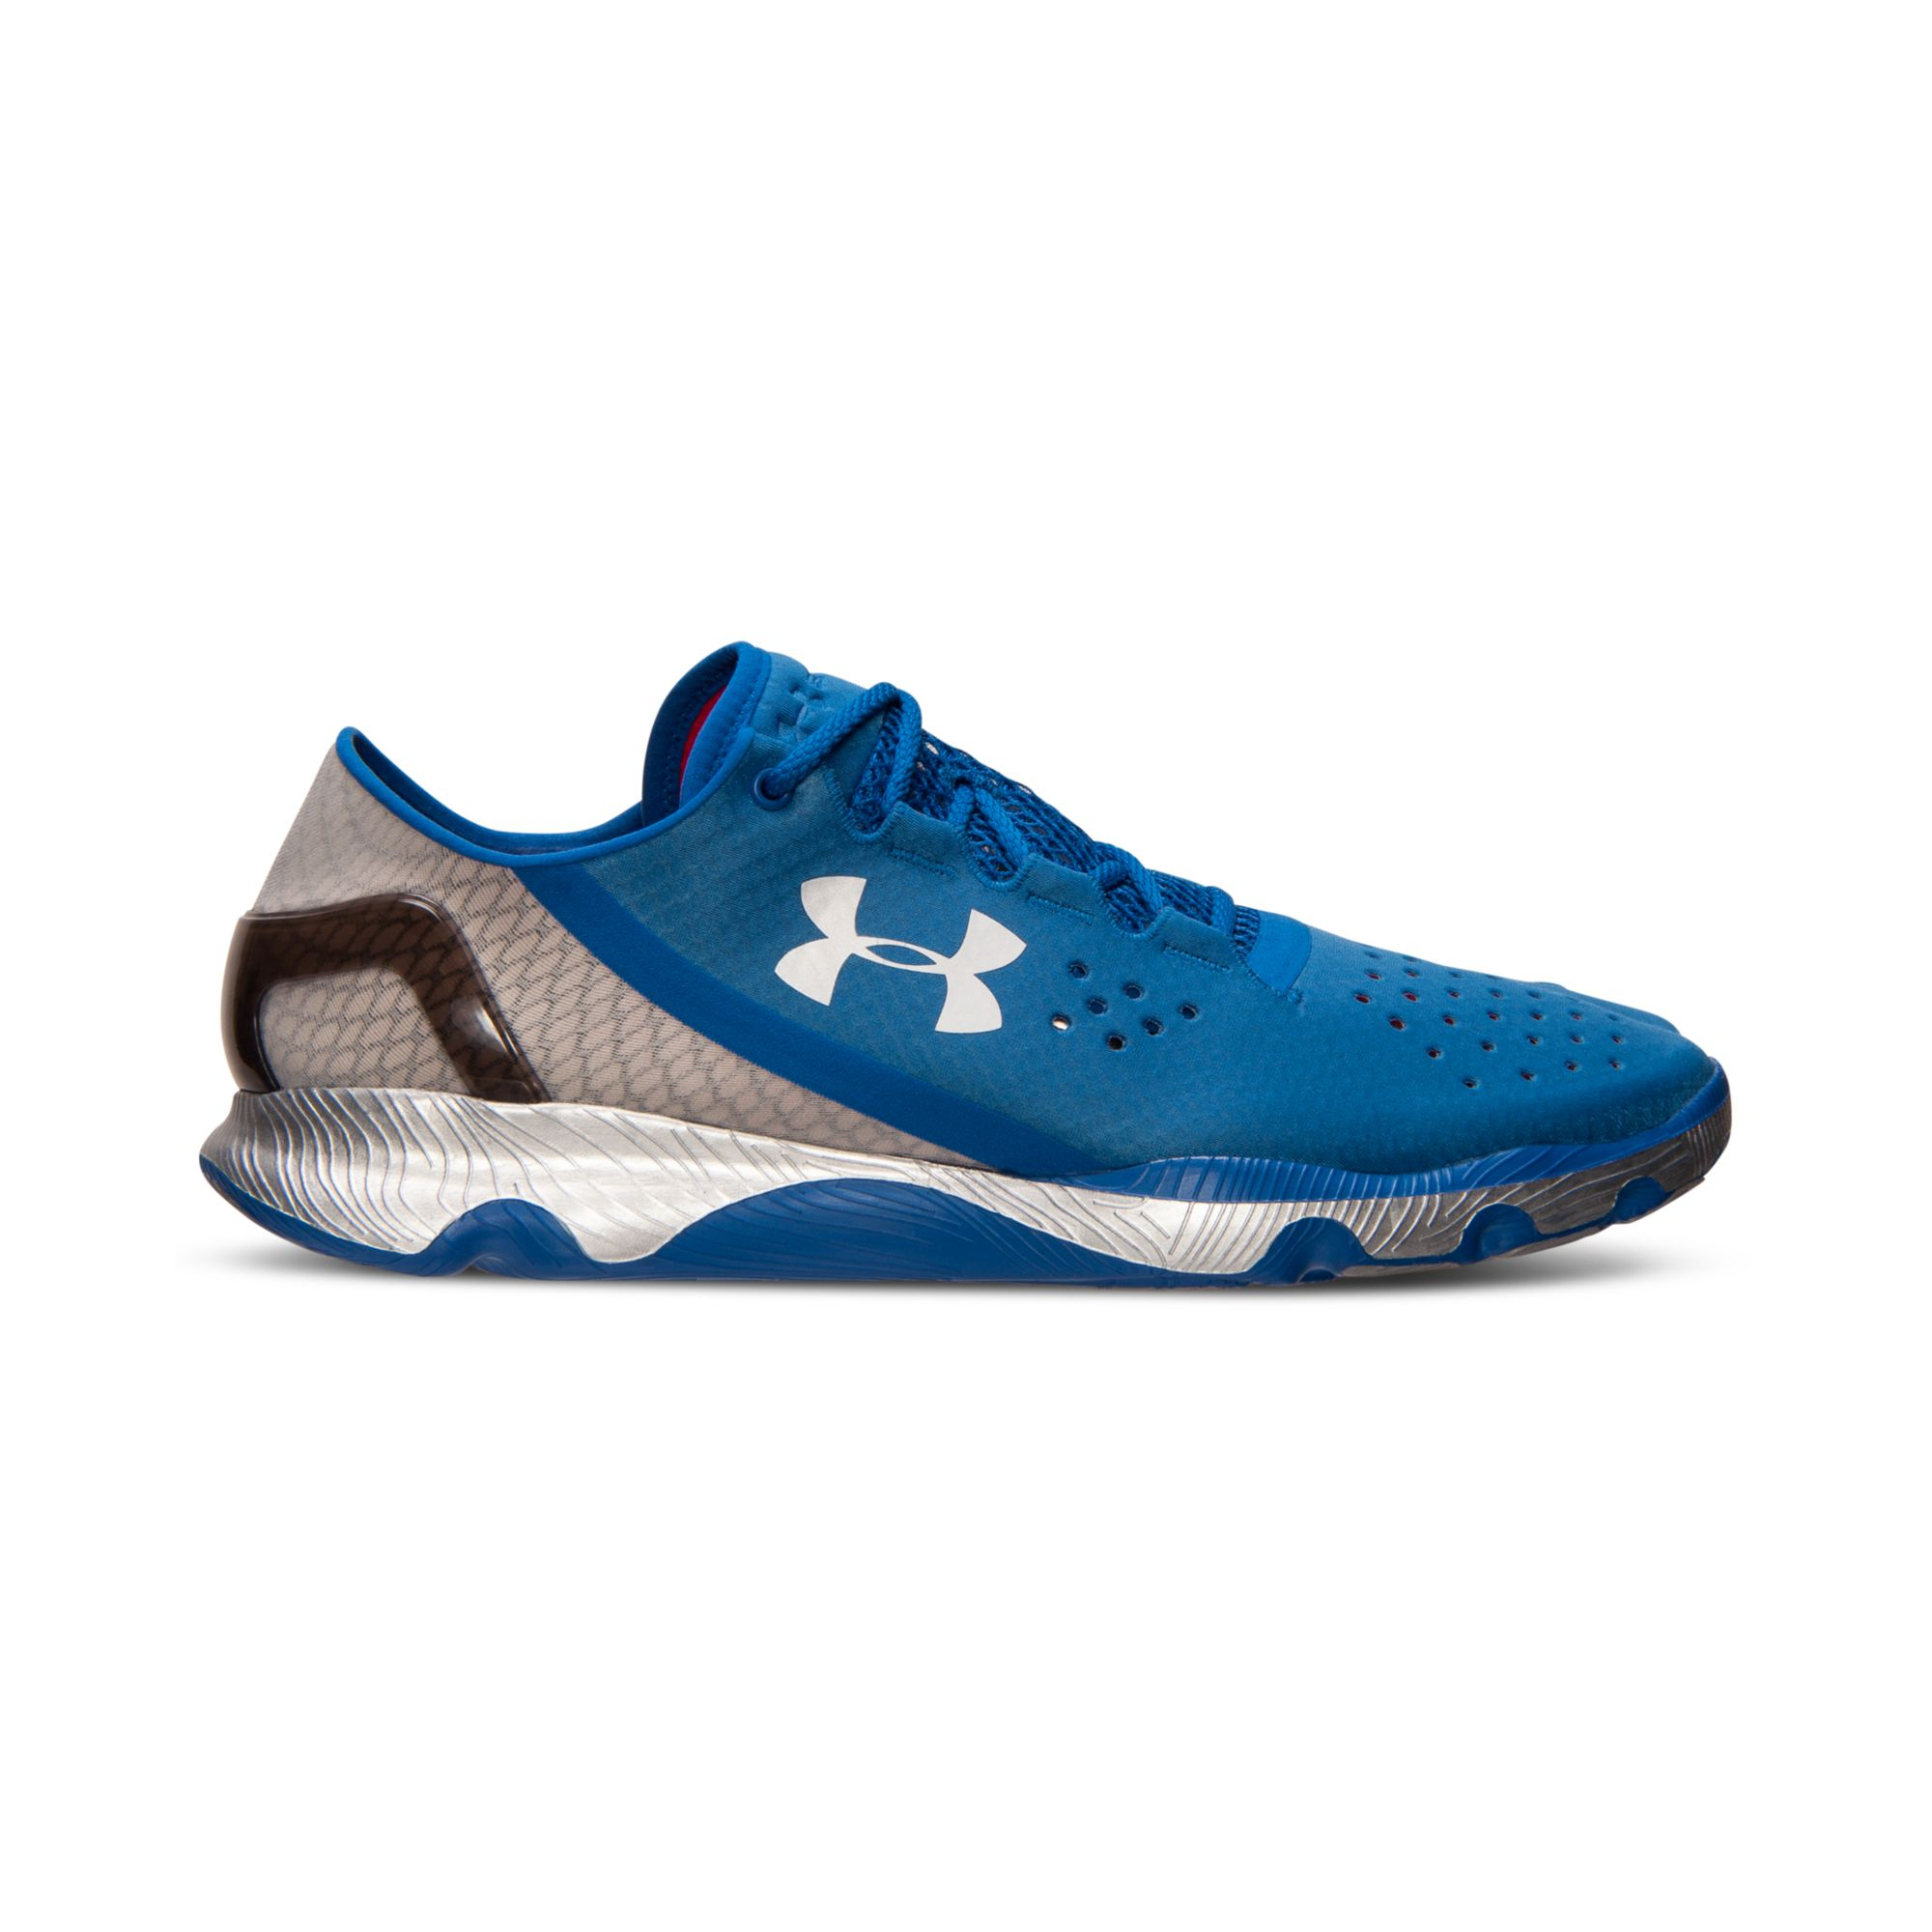 Under armour Mens Speedform Apollo Running Sneakers From Finish Line in ...